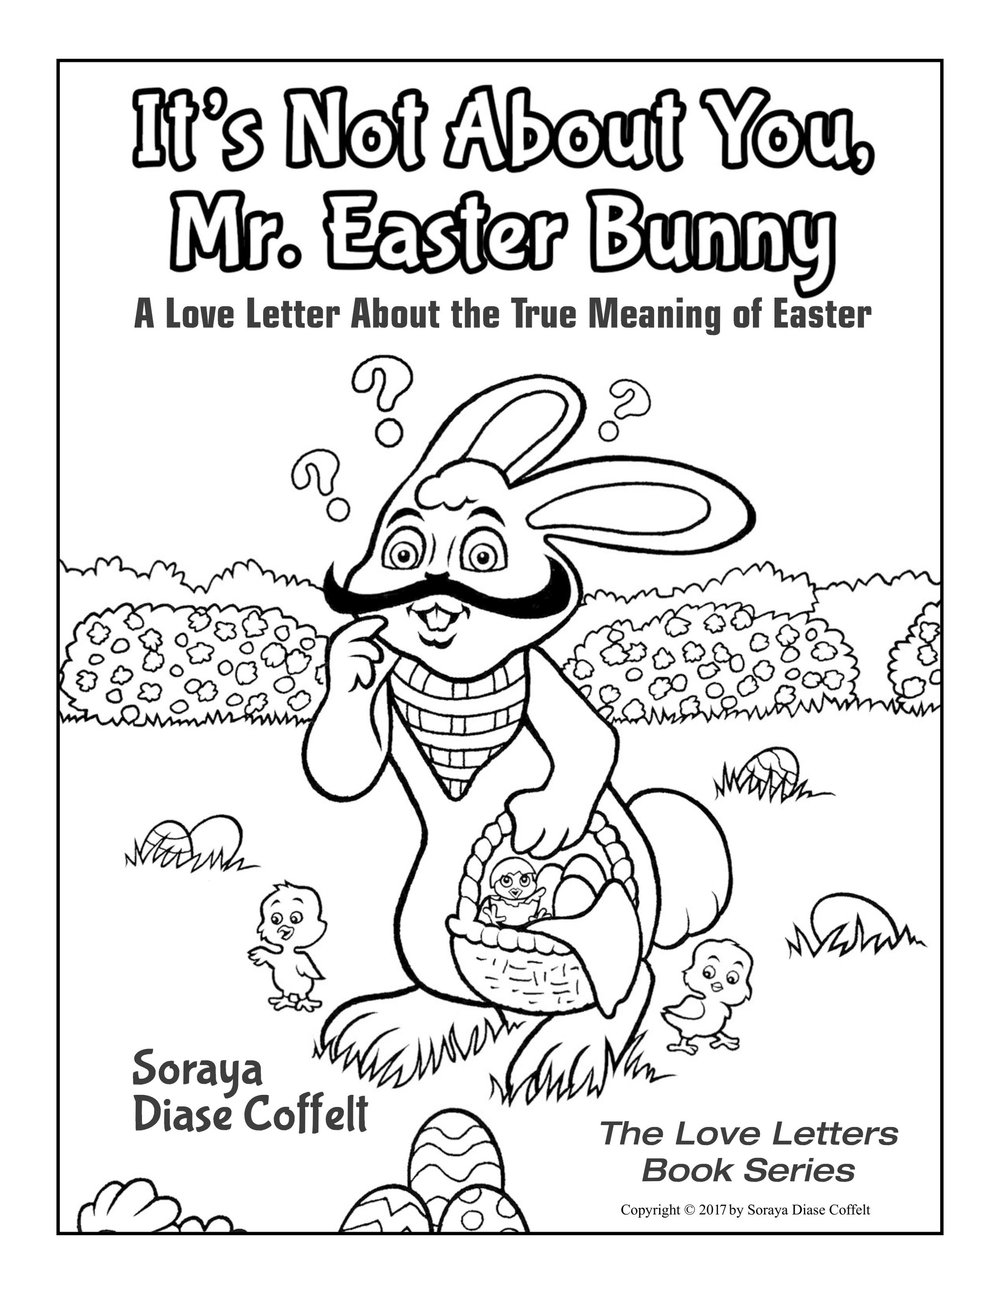 It's Not About You, Mr. Easter Bunny Coloring Book — Soraya Diase Coffelt::  Podcast host and event speaker sharing lifechanging stories of hope